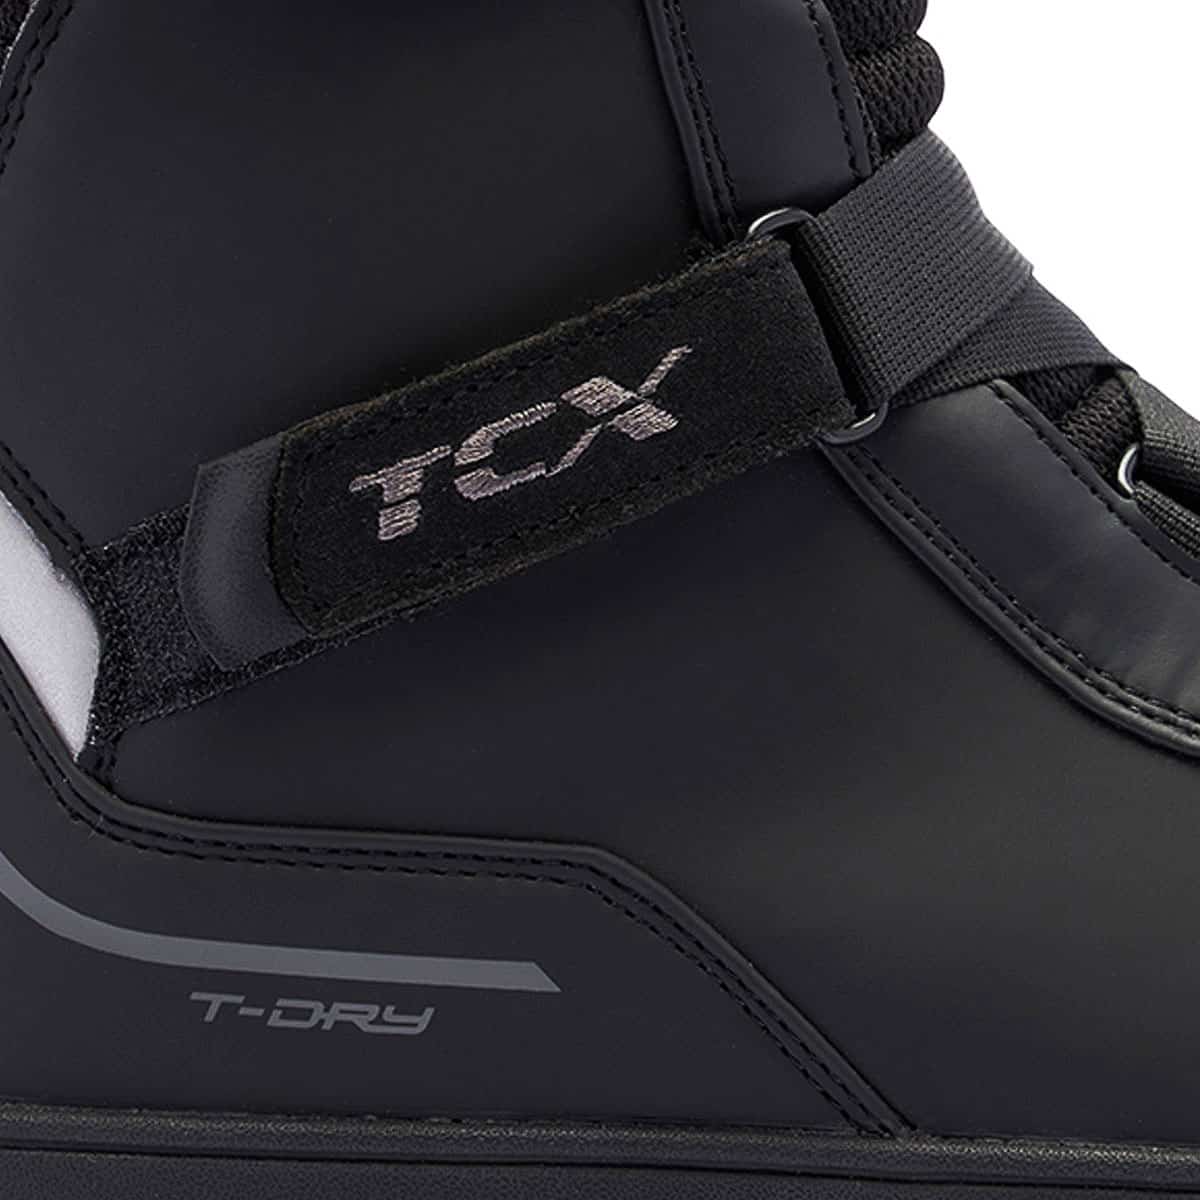 TCX Touring Boots with innovative lacing closure for perfect fit - ankle strap